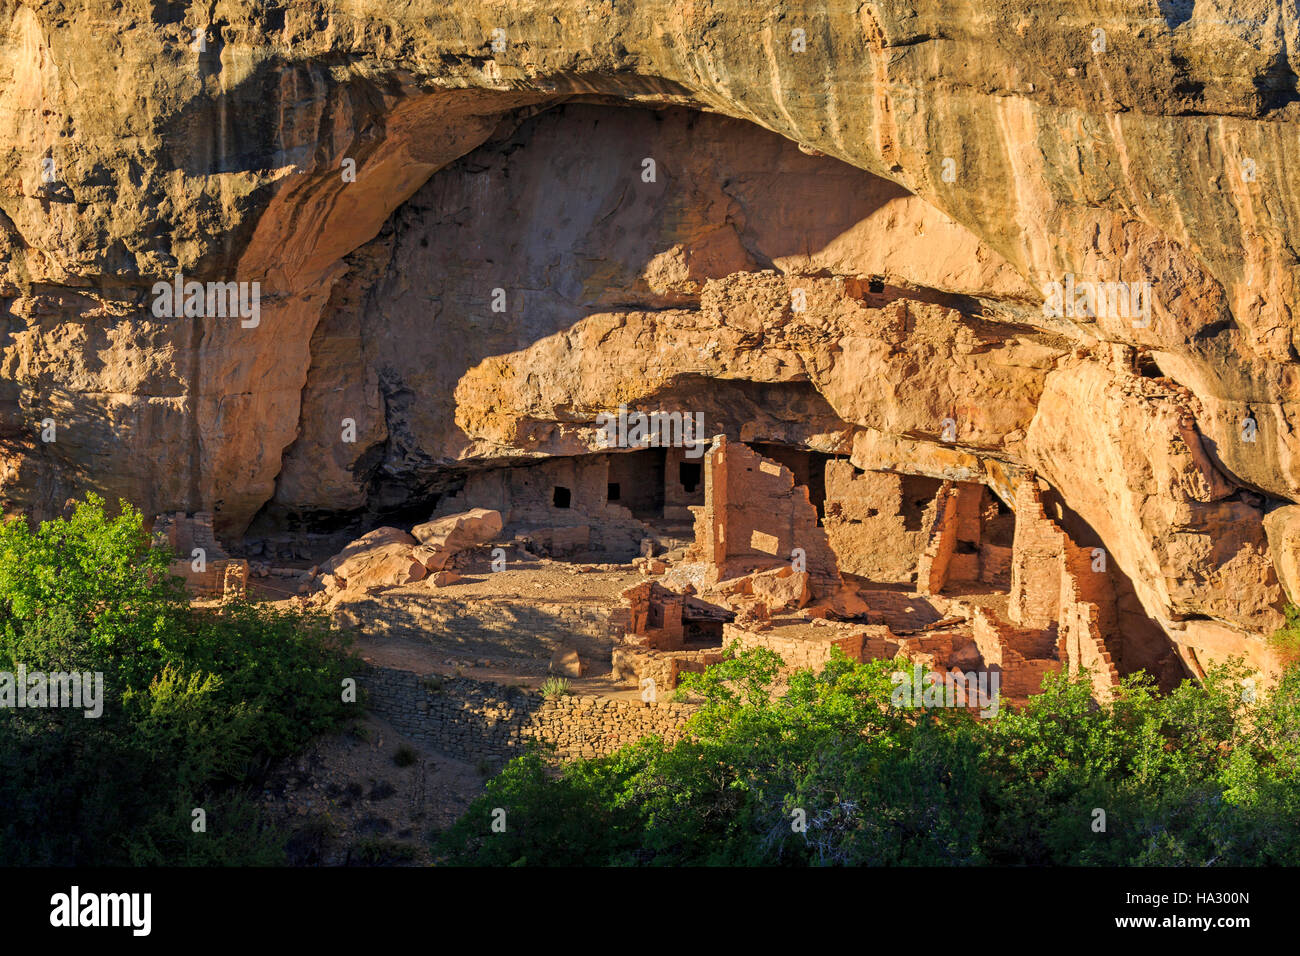 In this shot the setting sun lights up the Oak Tree House in Mesa Verde National Park, Colorado, USA. Stock Photo